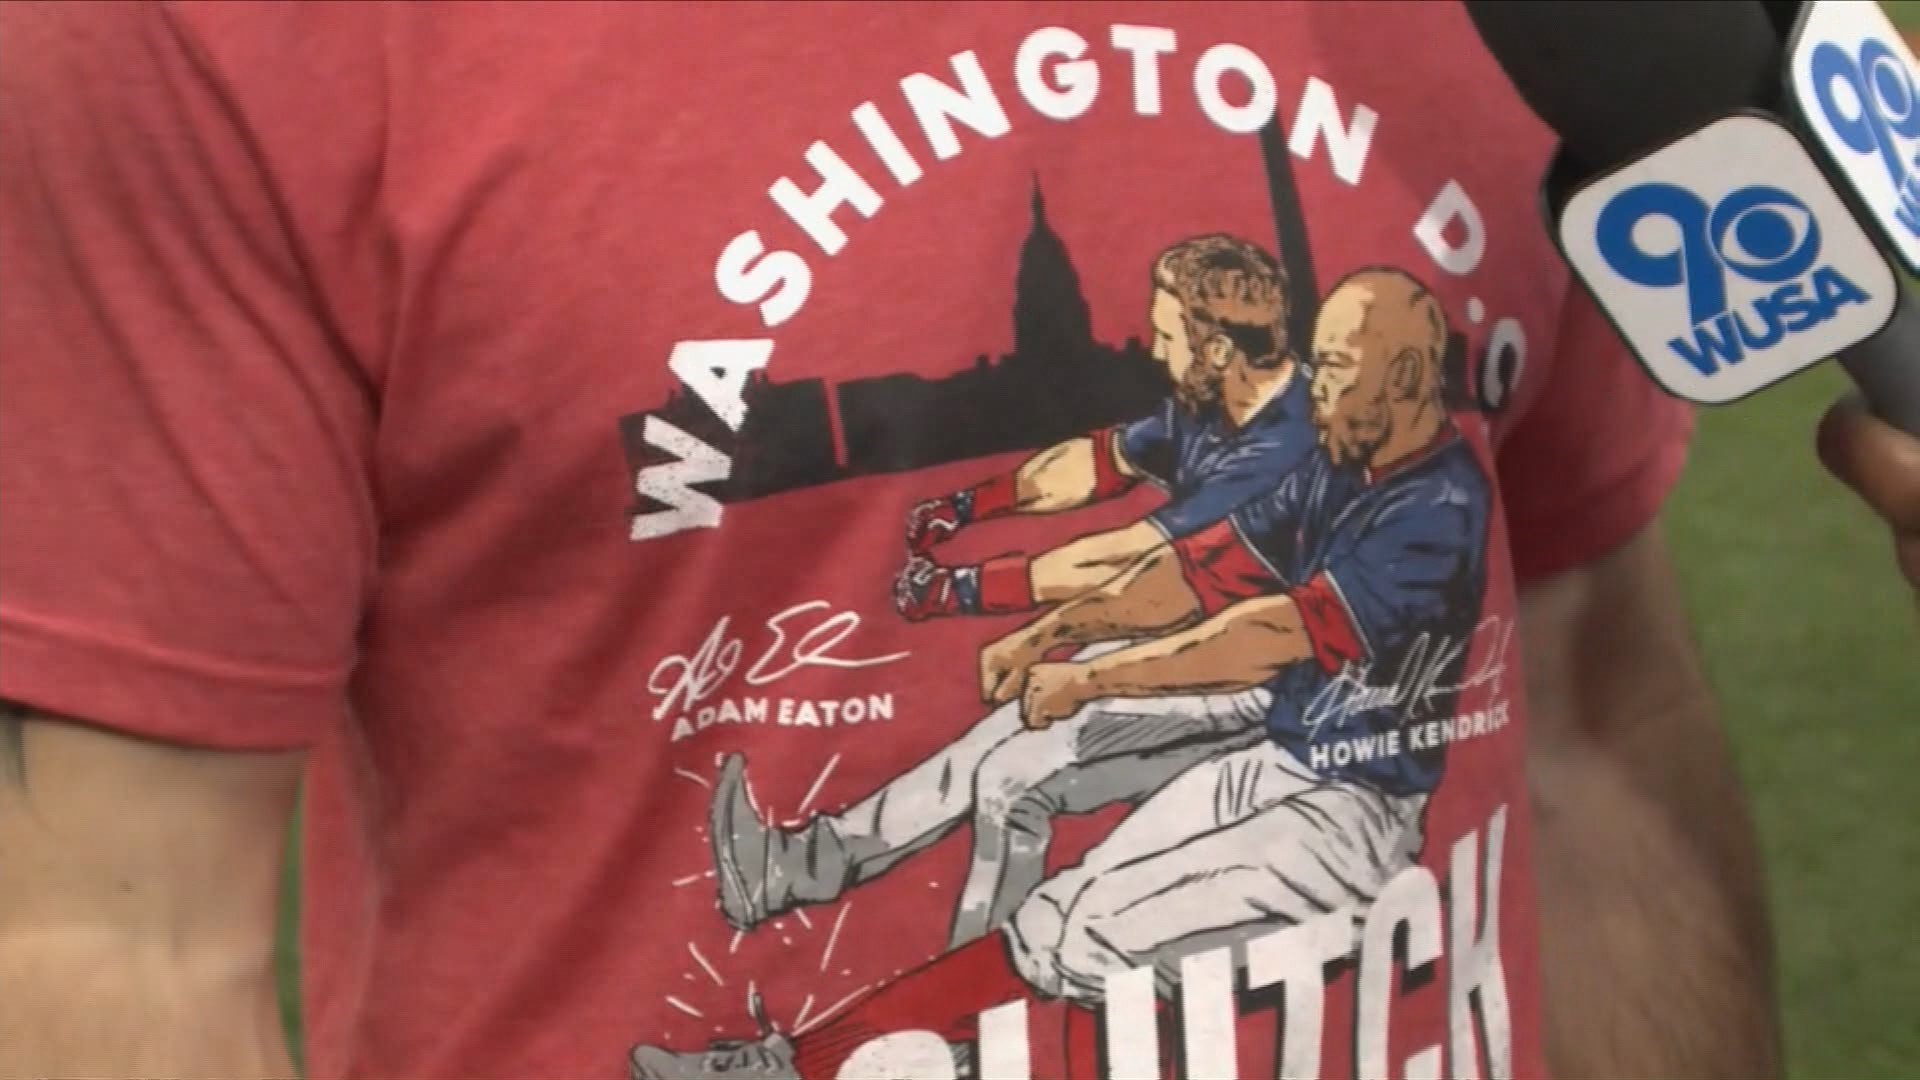 Adam Eaton got his epic dugout dance with Howie Kendrick printed on a shirt